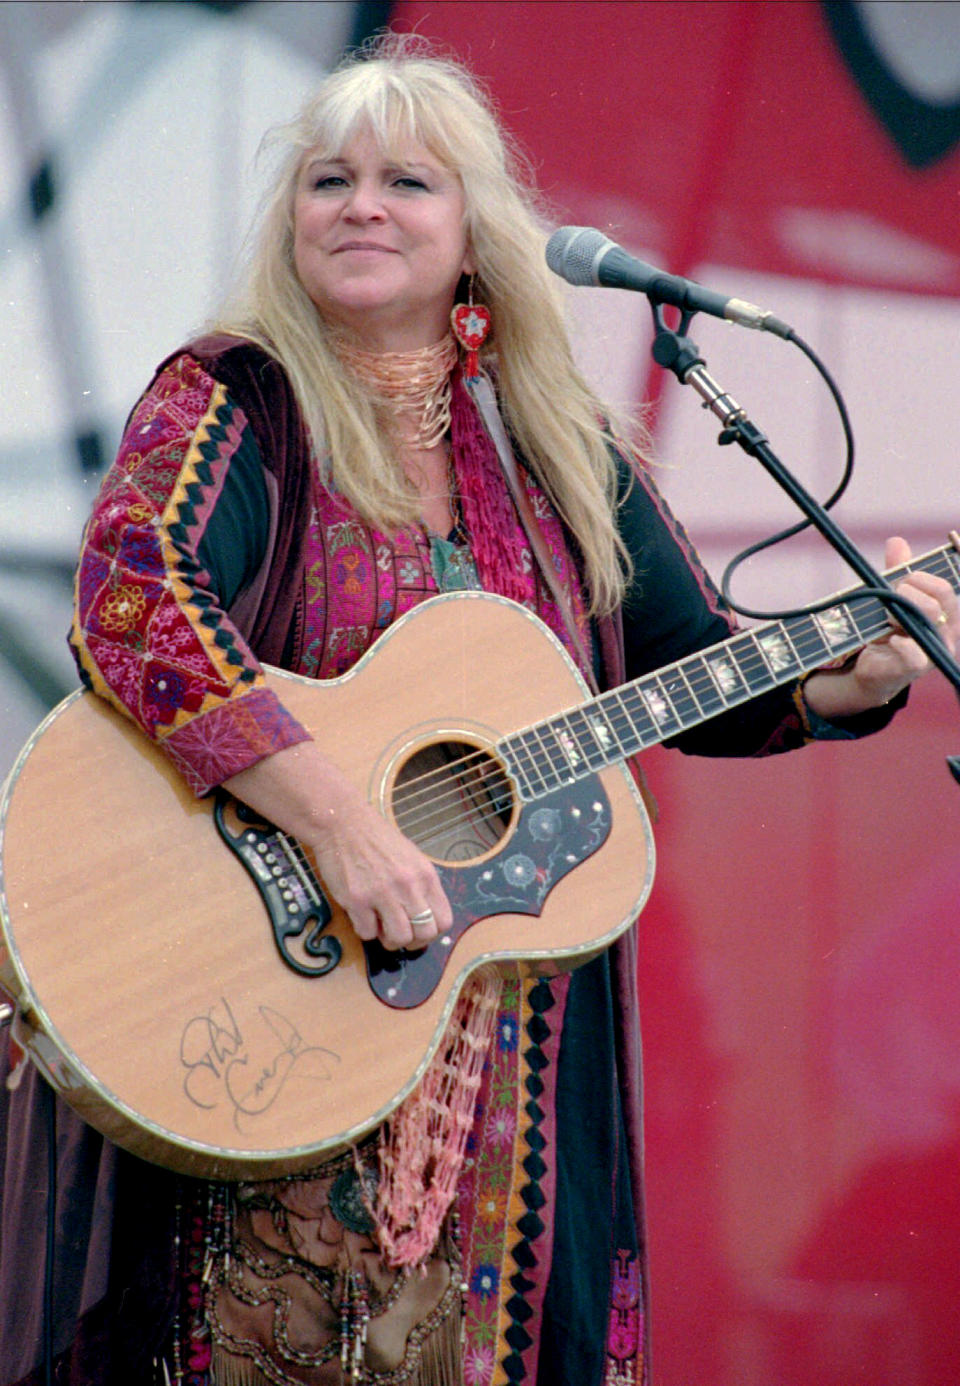 FILE - Melanie Safka opens the second day of the "A Day In The Garden" festival on Aug. 15, 1988, in Bethel, N.Y. Melanie, a singer-songwriter behind 1970s hits including “Brand New Key,” has died. Melanie's publicist tells The Associated Press that she died Tuesday, Jan. 23, 2024. She was 76. Born Melanie Safka, the singer rose through the New York folk scene and was one of only three solo women to perform at Woodstock. Her hits included “Lay Down” and “Look What They've Done to My Song Ma.” (AP Photo/Ken Bizzigotti, File)